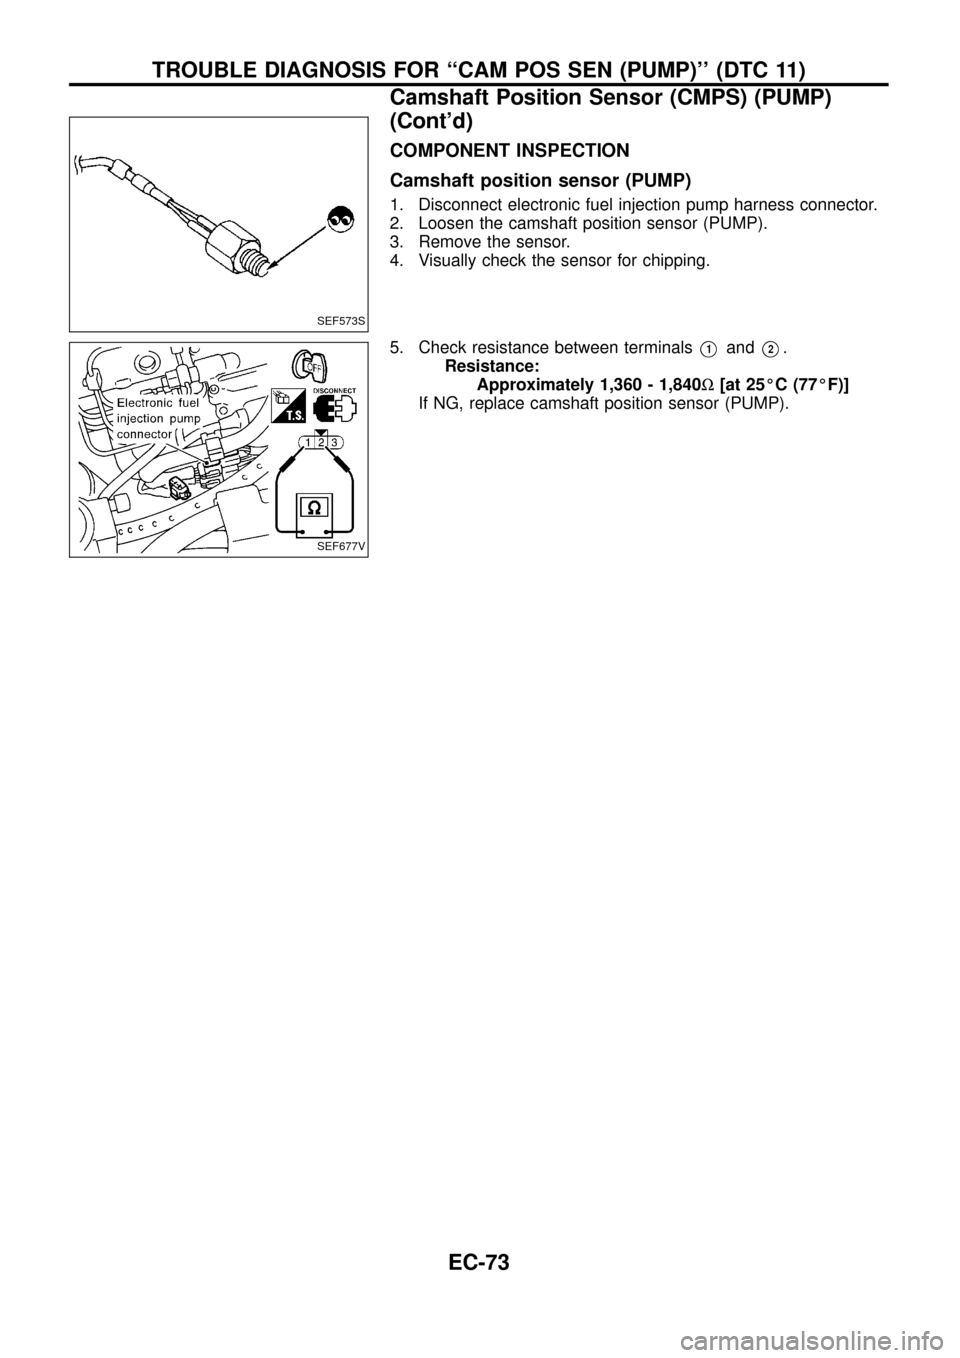 NISSAN PATROL 1998 Y61 / 5.G Engine Control Manual PDF COMPONENT INSPECTION
Camshaft position sensor (PUMP)
1. Disconnect electronic fuel injection pump harness connector.
2. Loosen the camshaft position sensor (PUMP).
3. Remove the sensor.
4. Visually ch